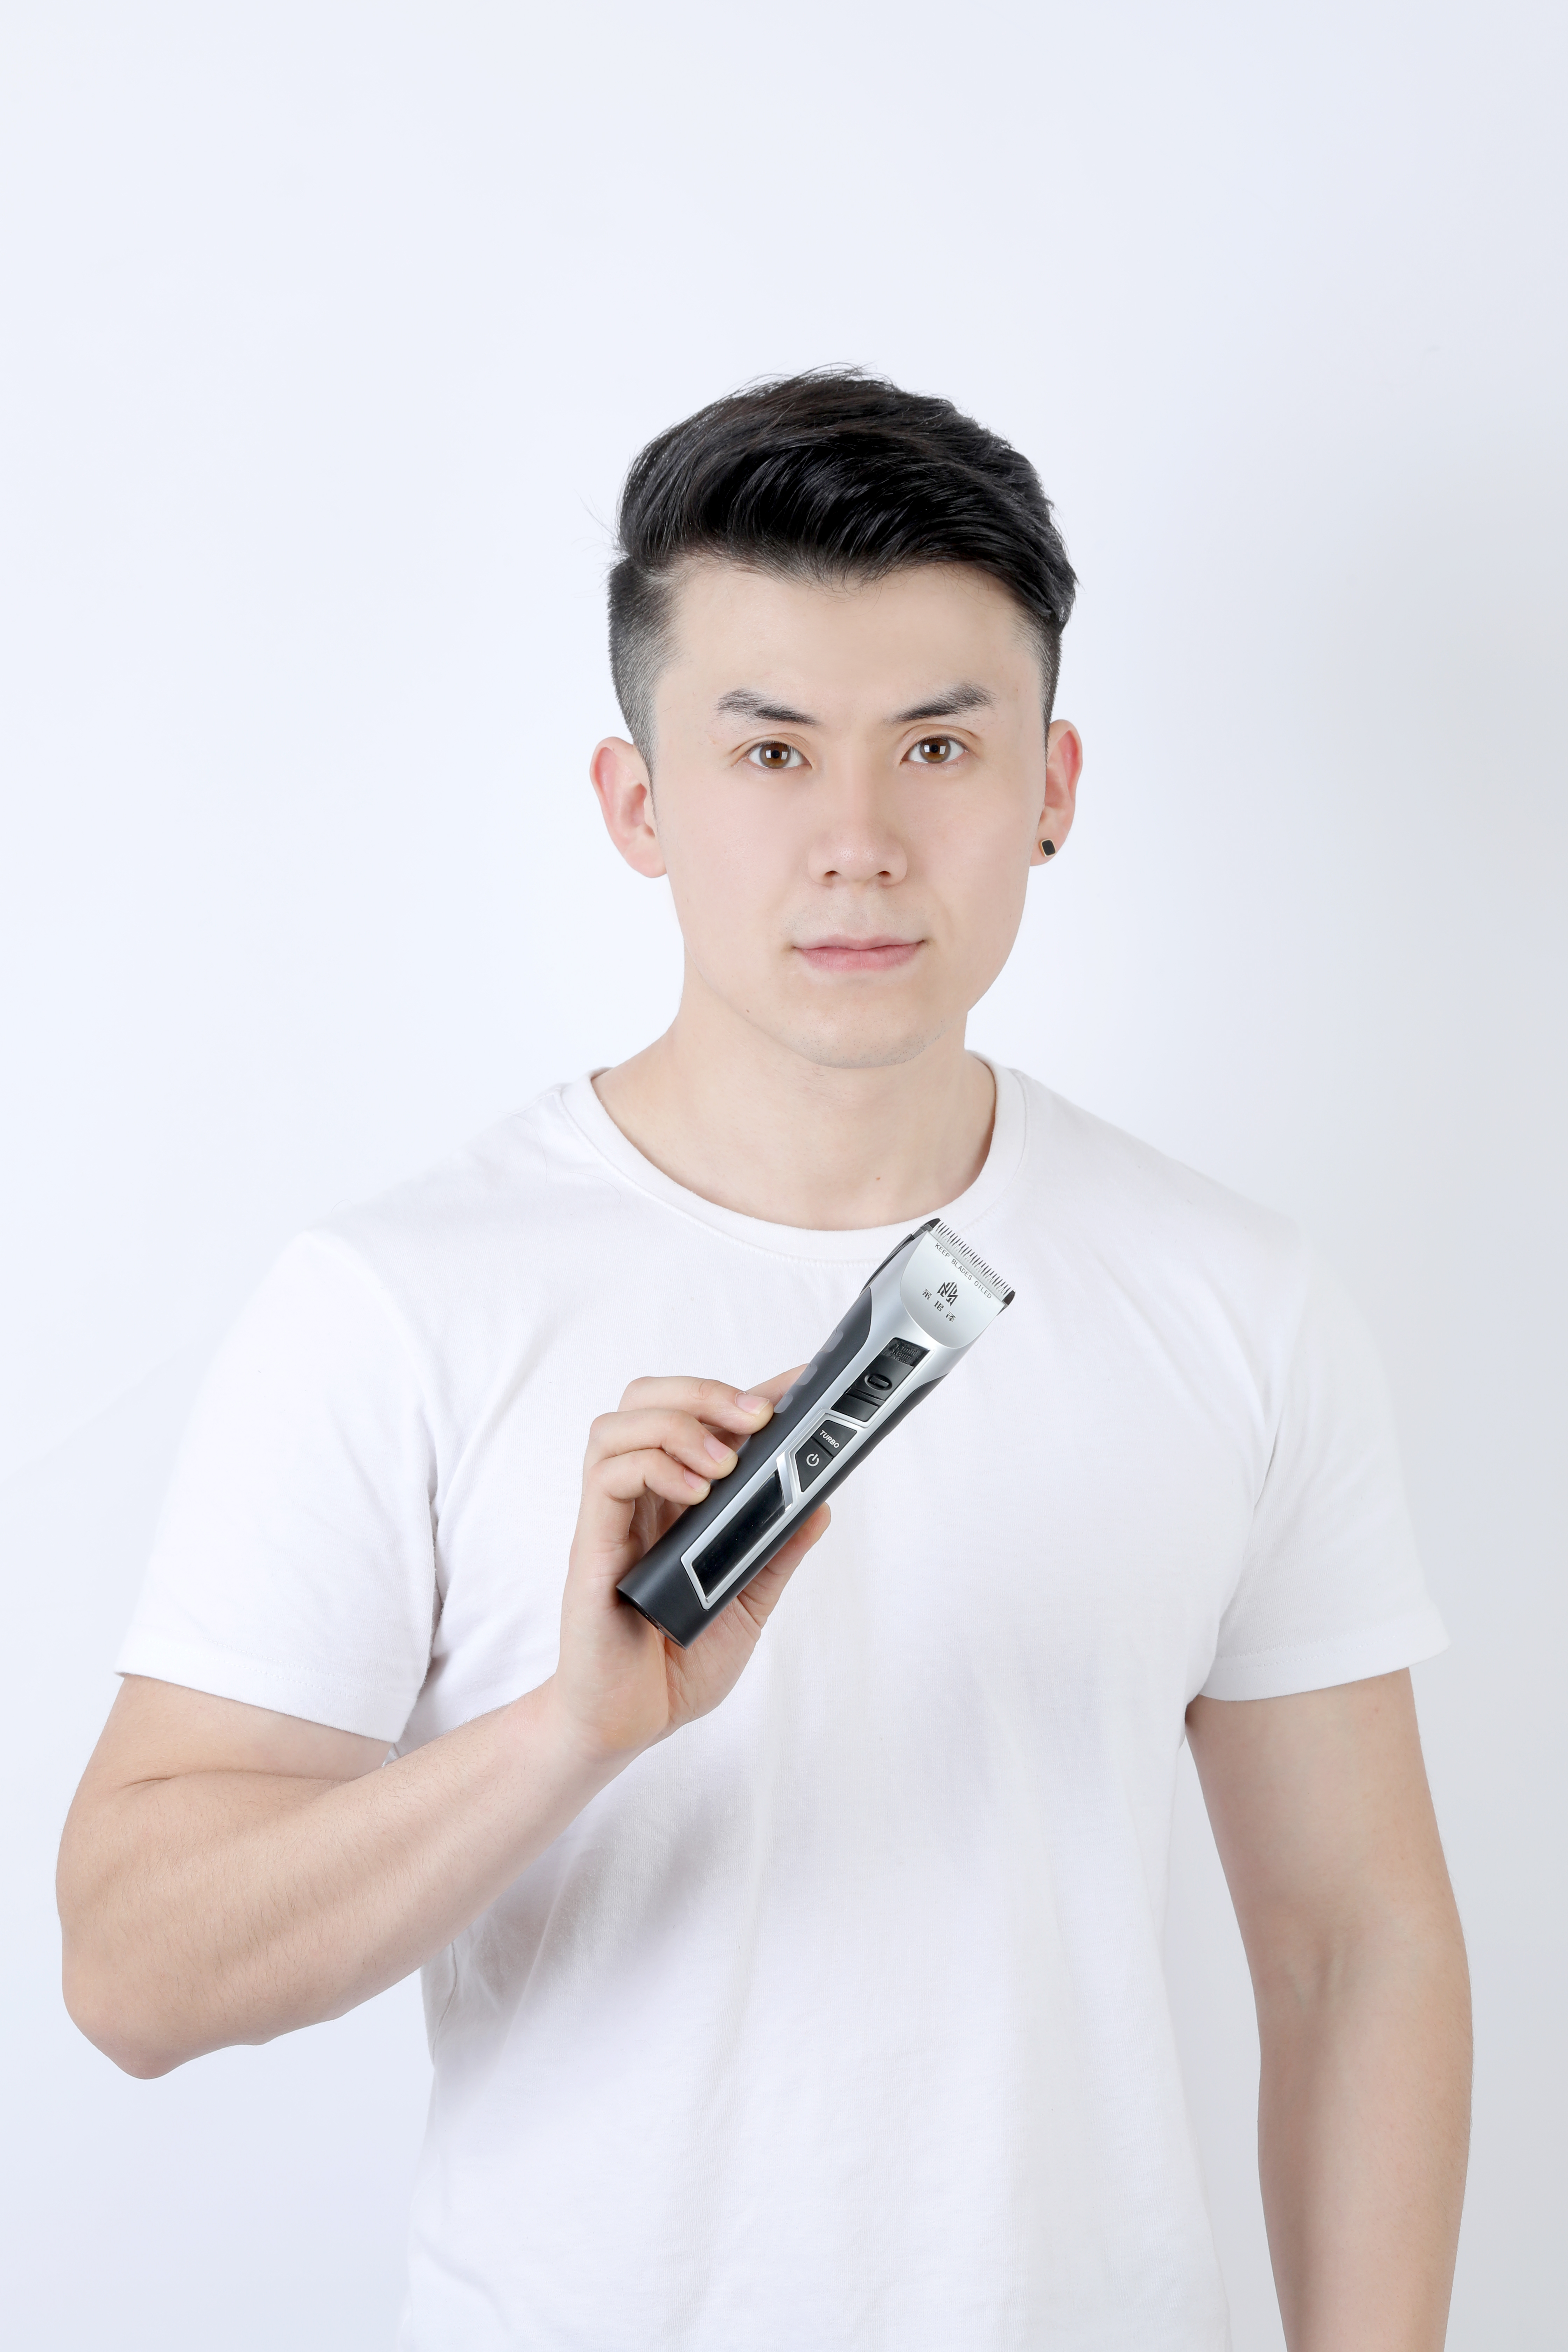 How to choose hair clippers?